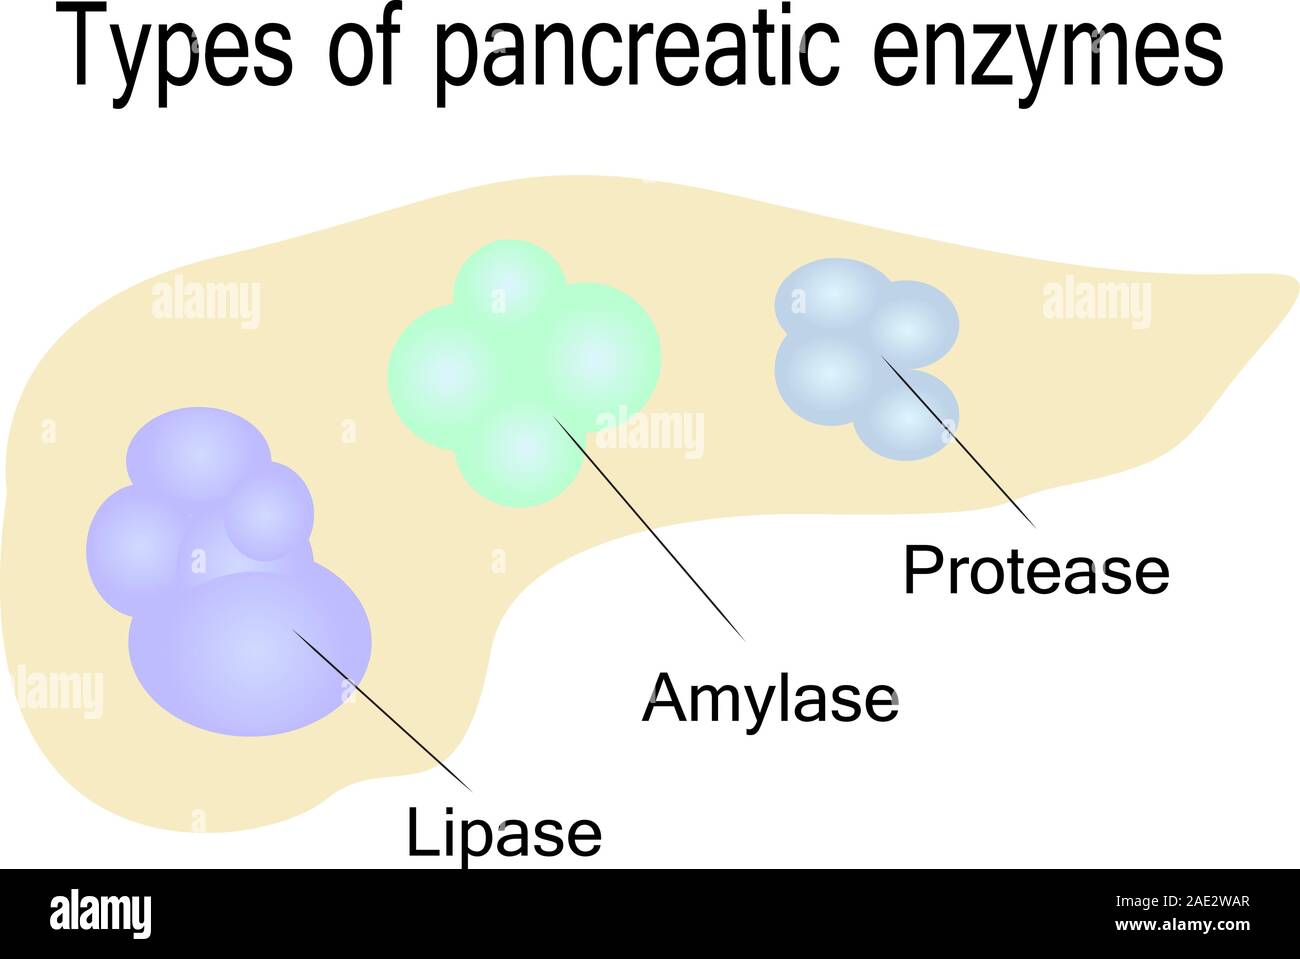 Types of pancreatic enzymes vector illustration on a white background Stock Vector